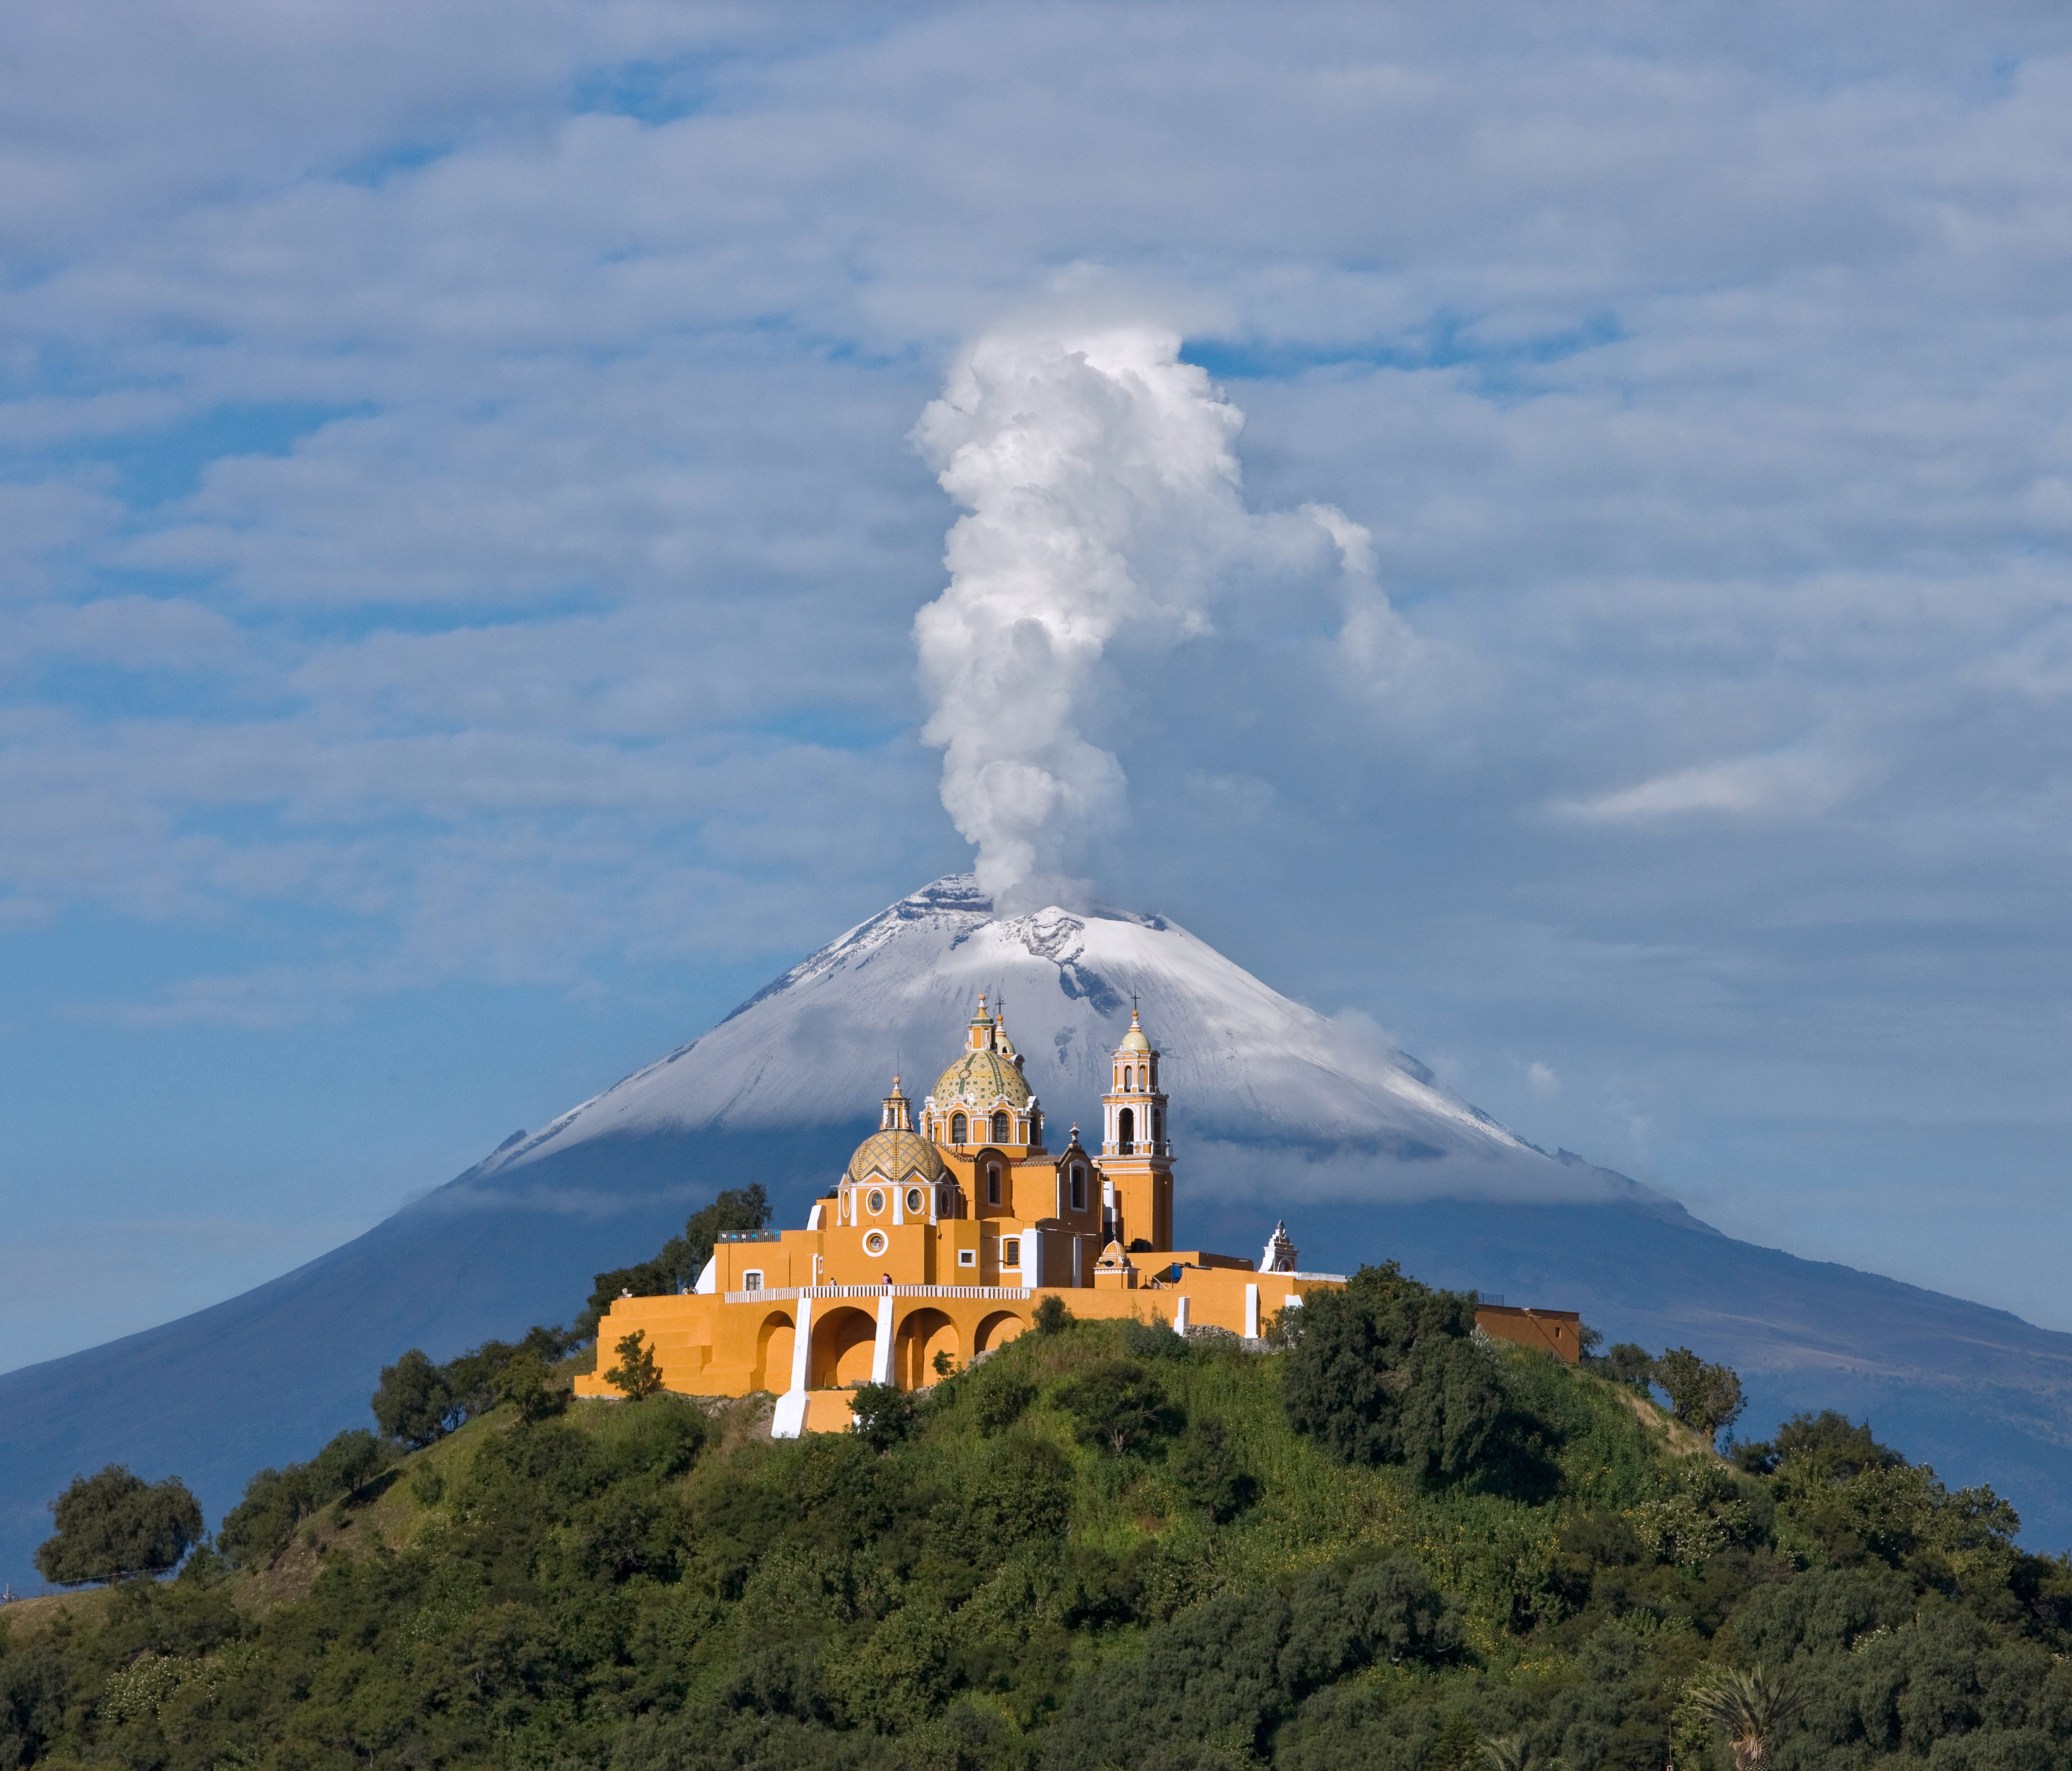 Cholula is a Pueblo Mágico only 9 miles from the major city of Puebla (Puebla is also the name of the state).